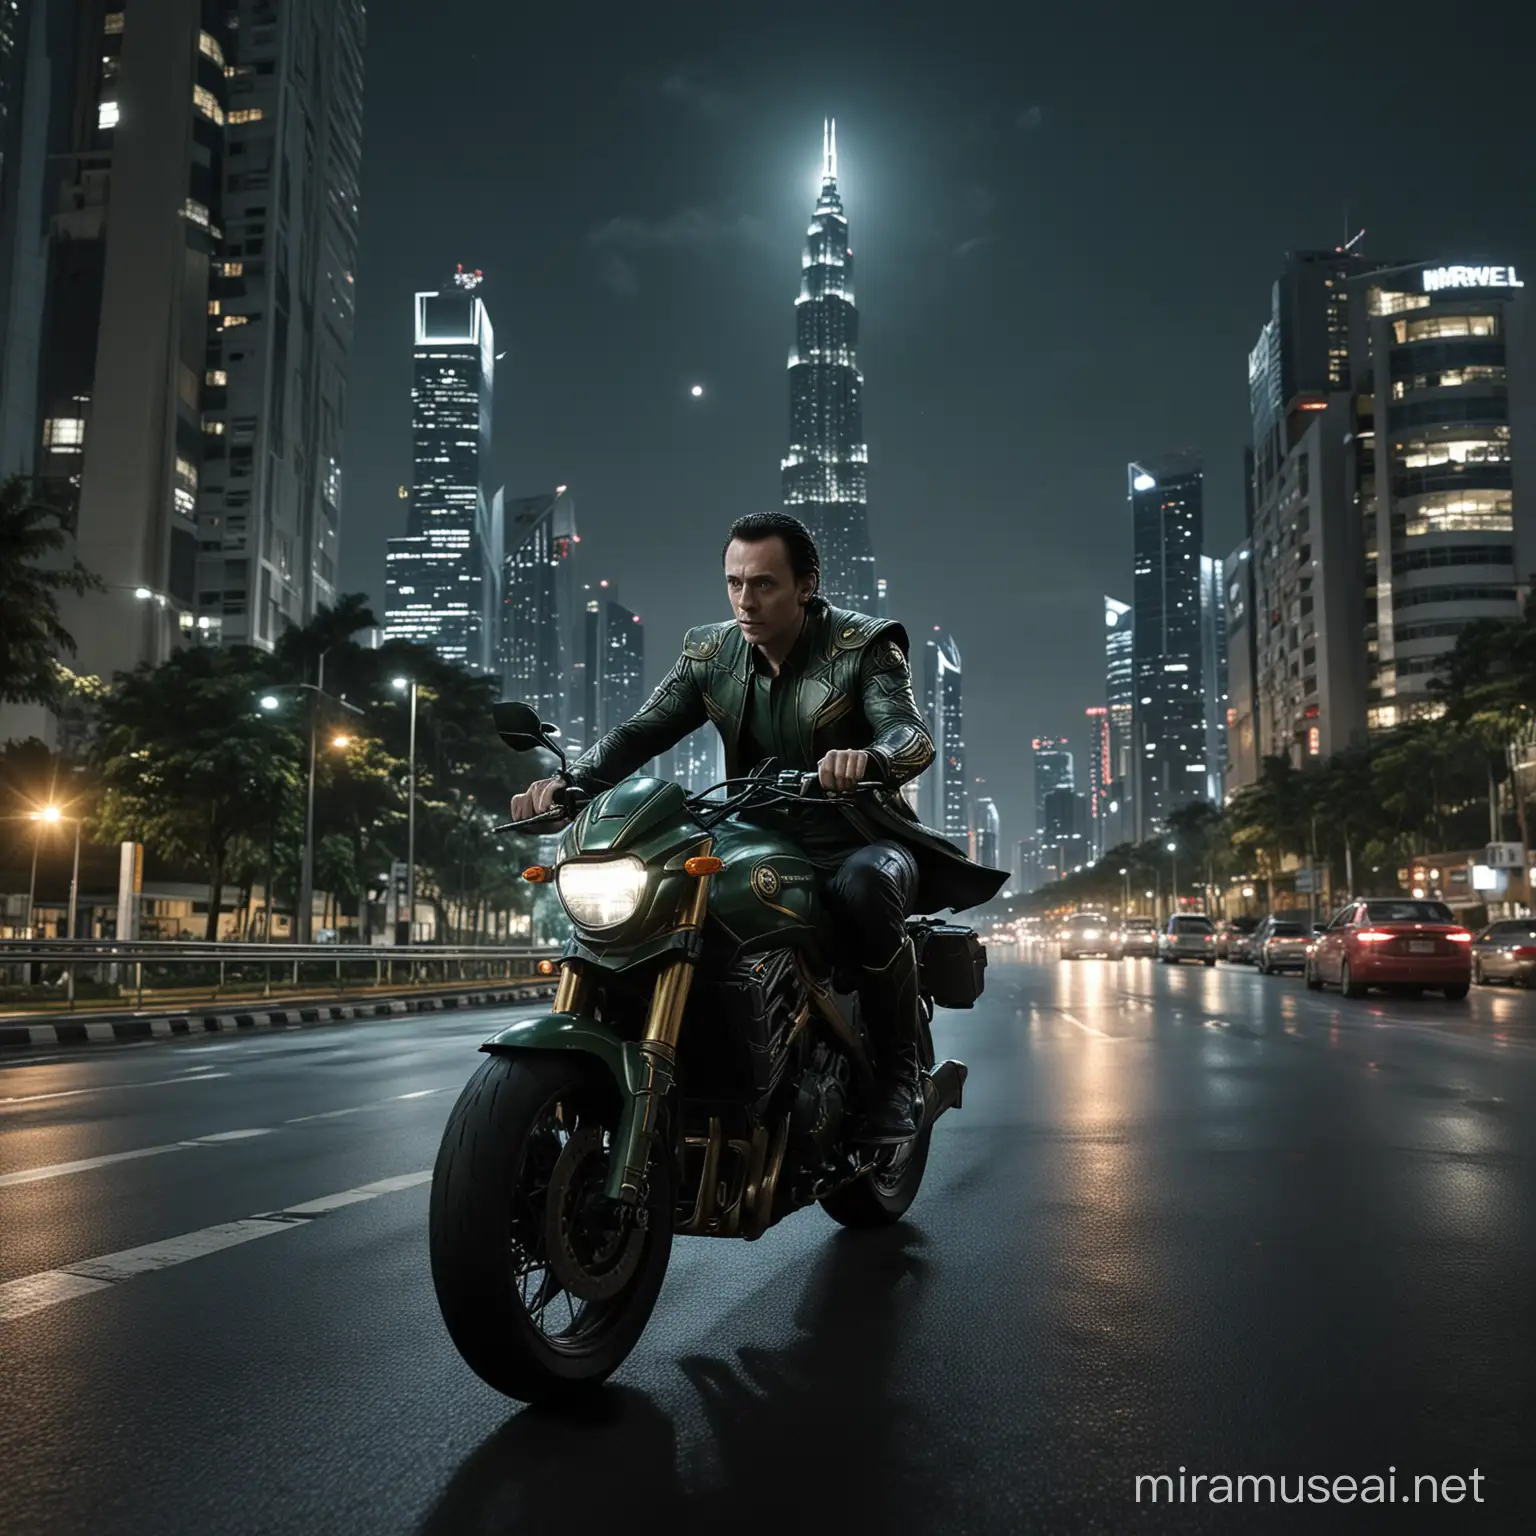 give me realistic image of loki laufeyson from marvel cinematic universe. in this picture he's riding a motorbike in jakarta road in the night. he ride a bike with tall building around them and there is a crescent moont behind. there is a busway transjakarta on the road and also mrt. he is enjoy the view of jakarta. the image is centering with the camera slightly upwards.